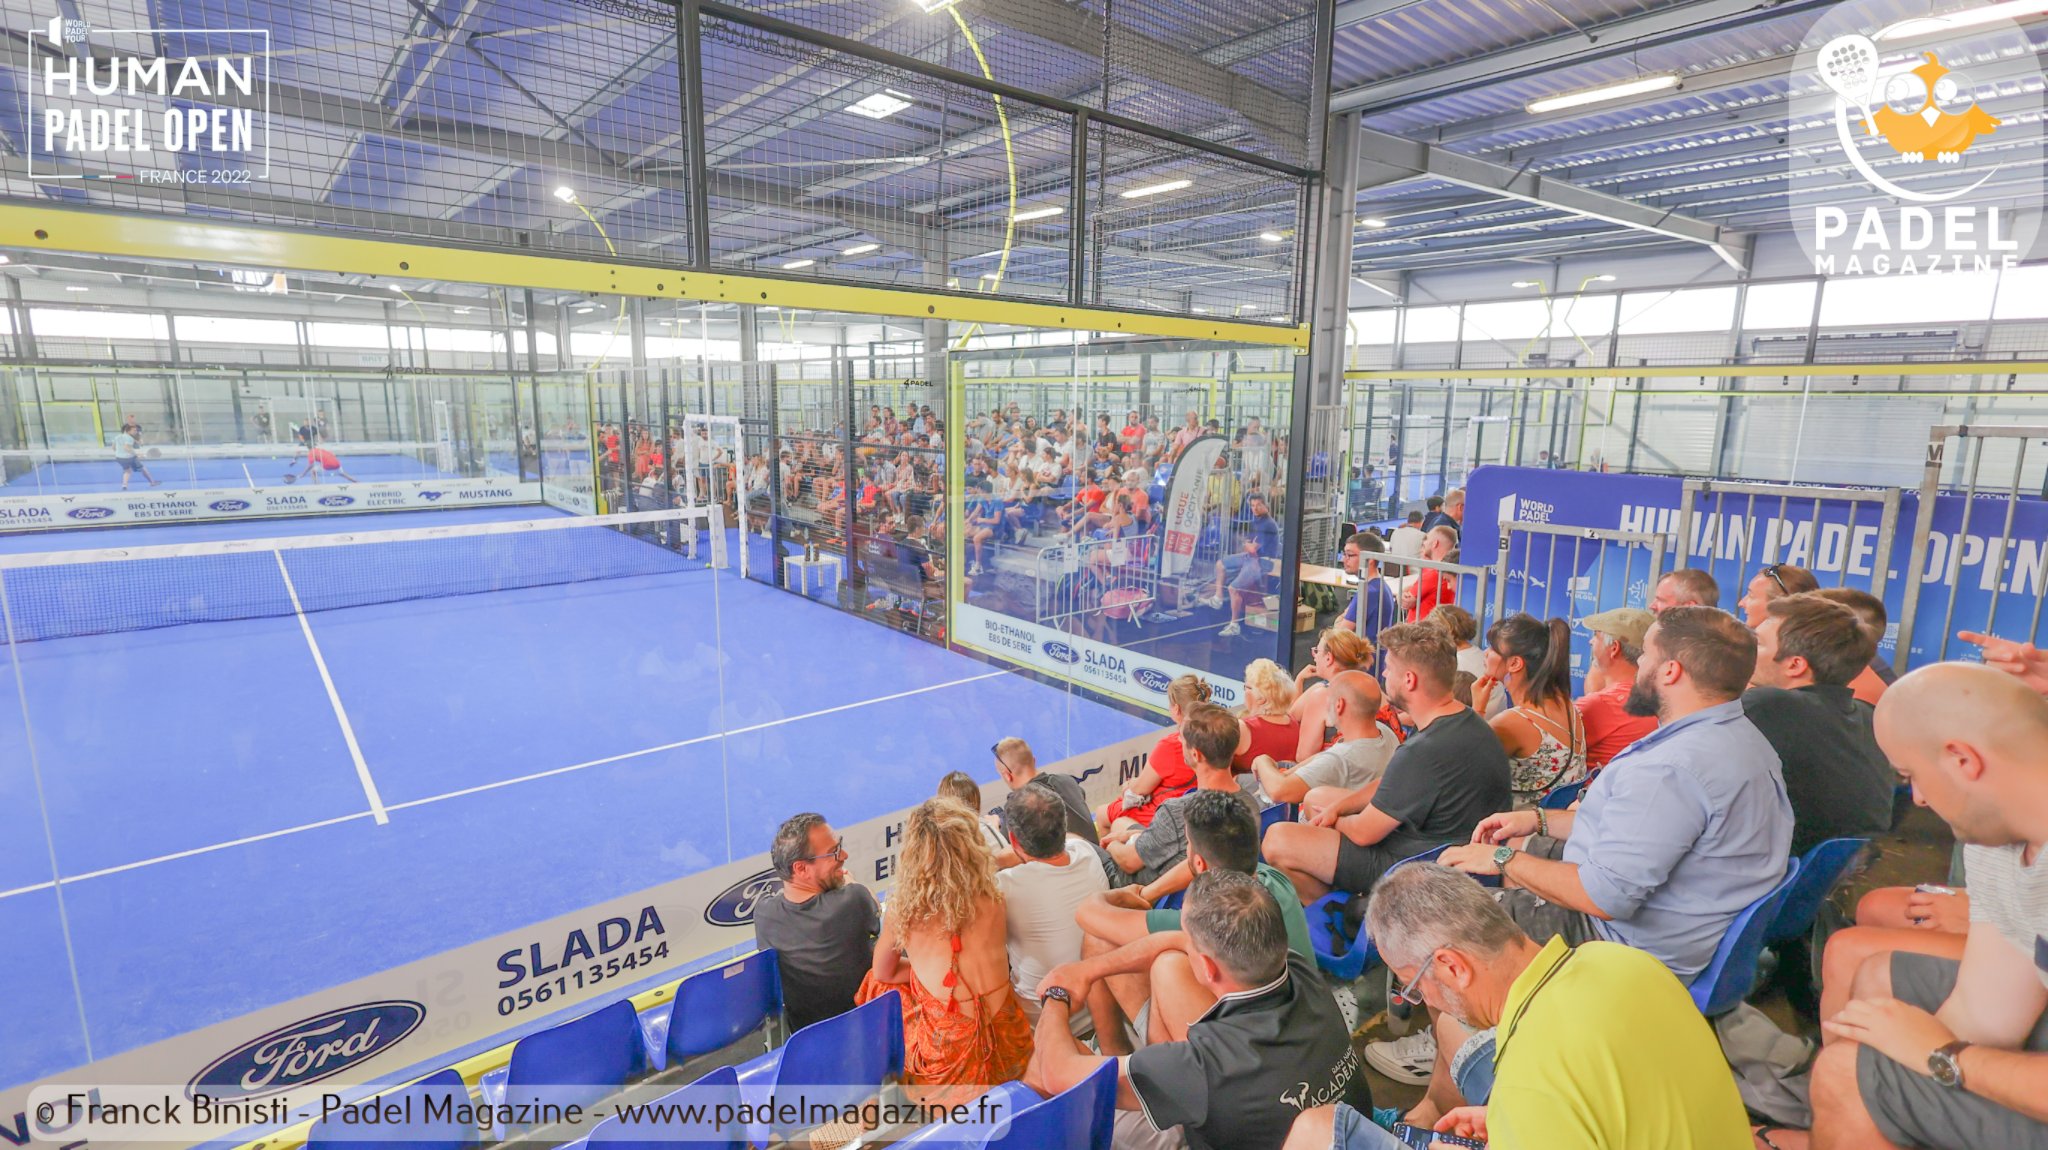 Public present in Toulouse WPT Human Padel Open 2022